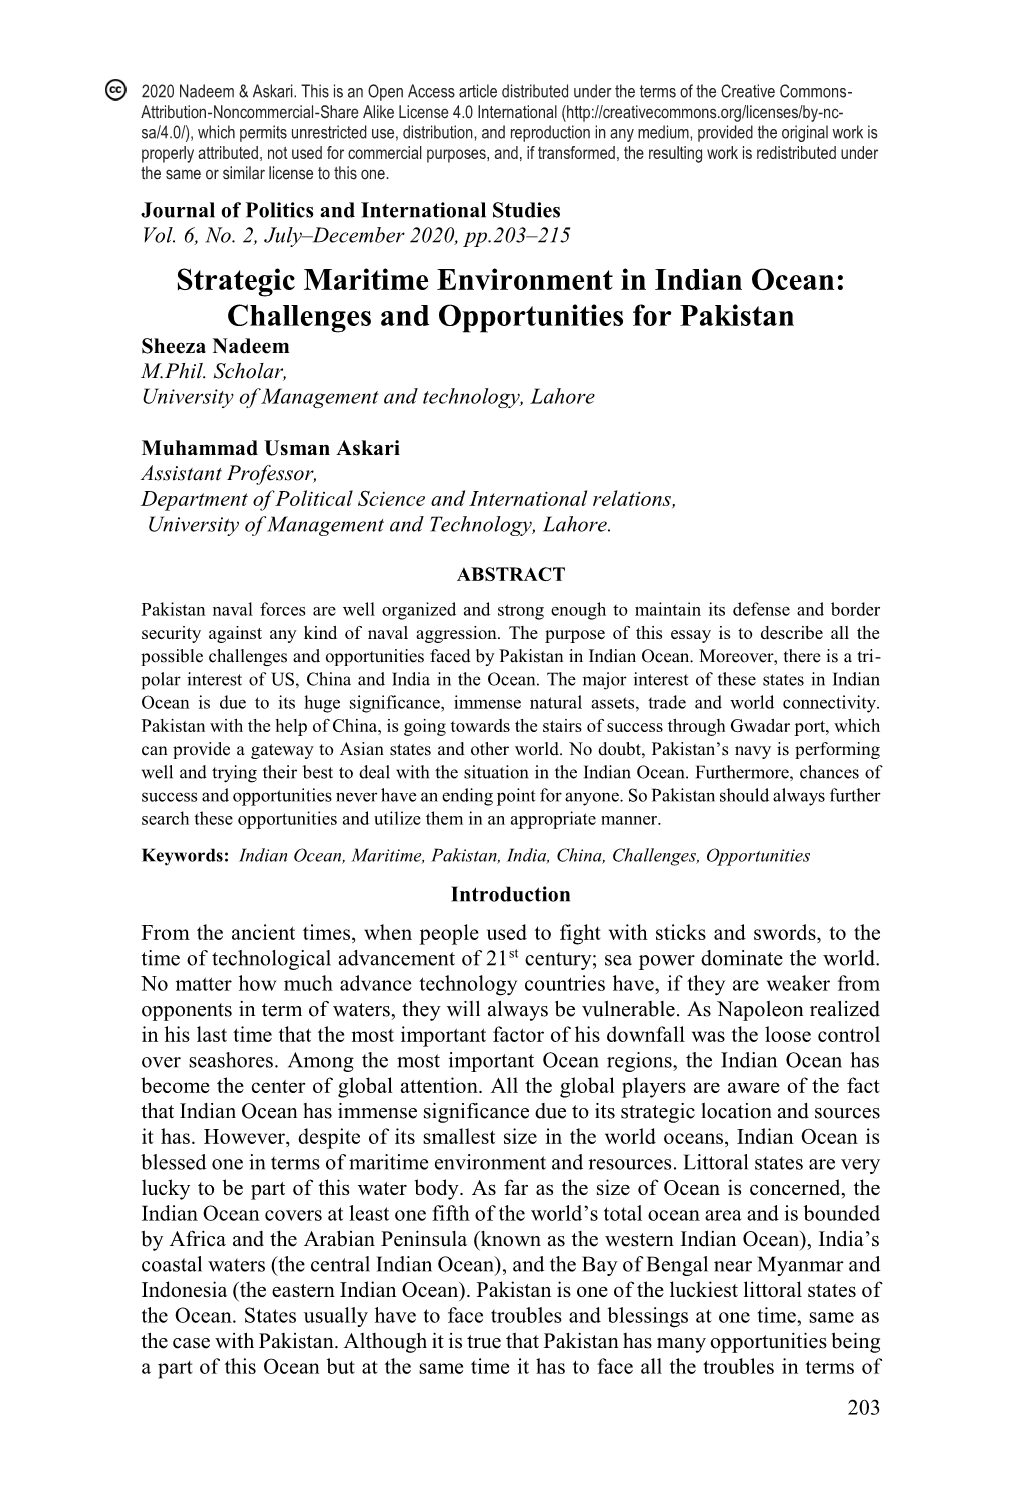 Strategic Maritime Environment in Indian Ocean: Challenges and Opportunities for Pakistan Sheeza Nadeem M.Phil